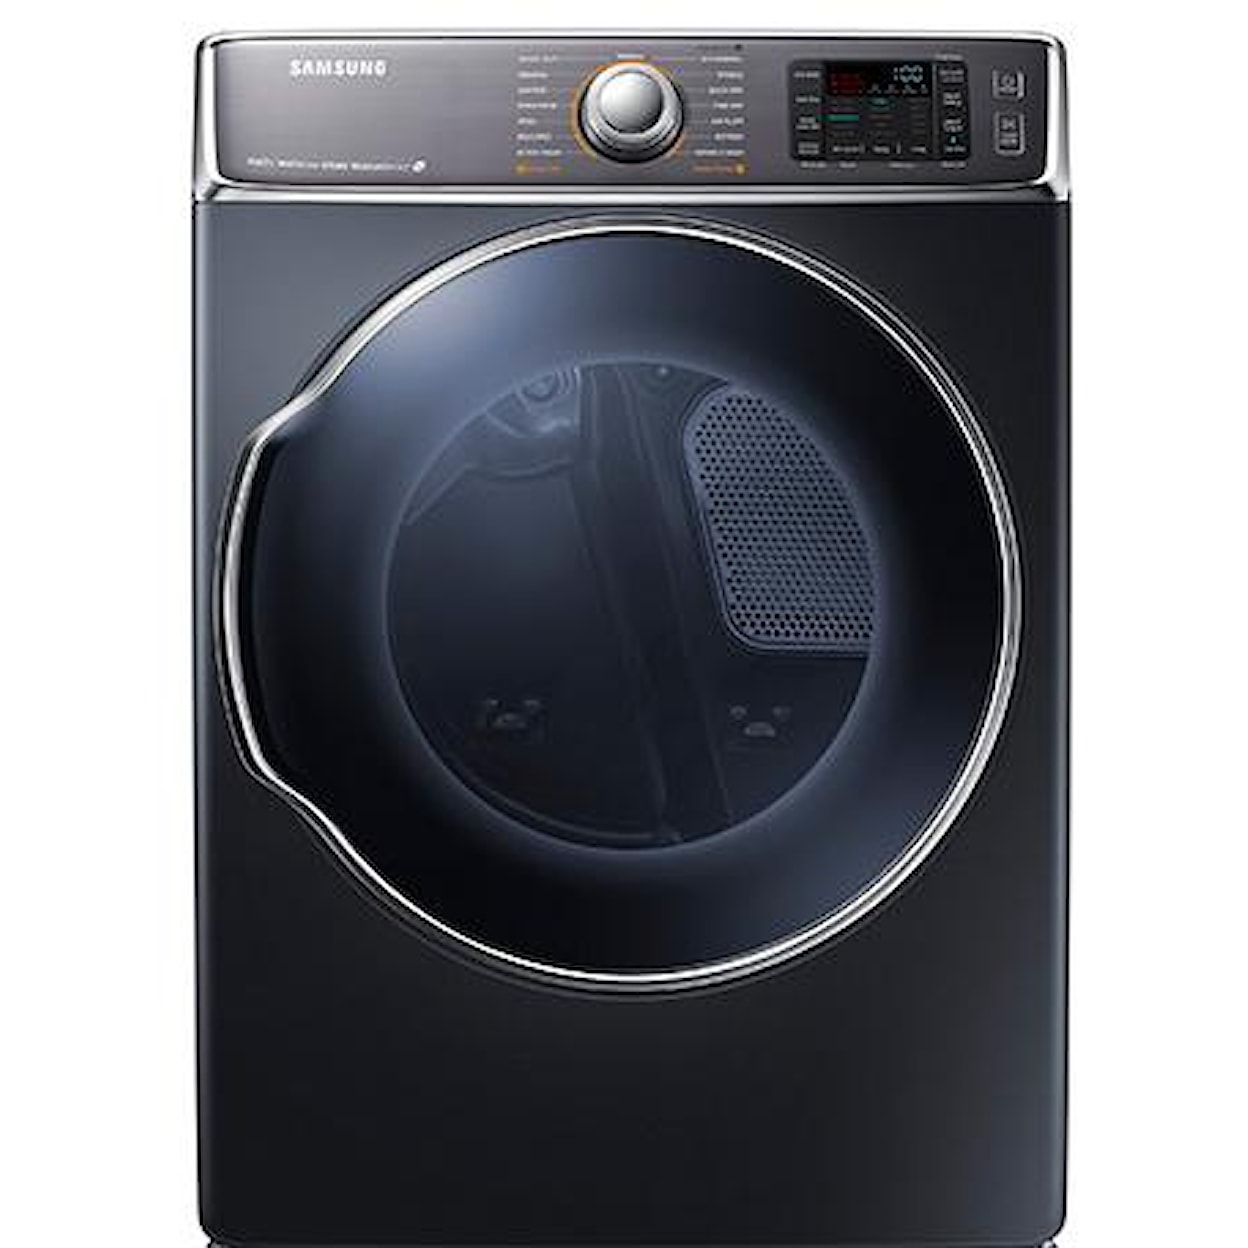 Samsung Appliances Electric Dryers 9.5 cu. ft. Electric Front Load Dryer